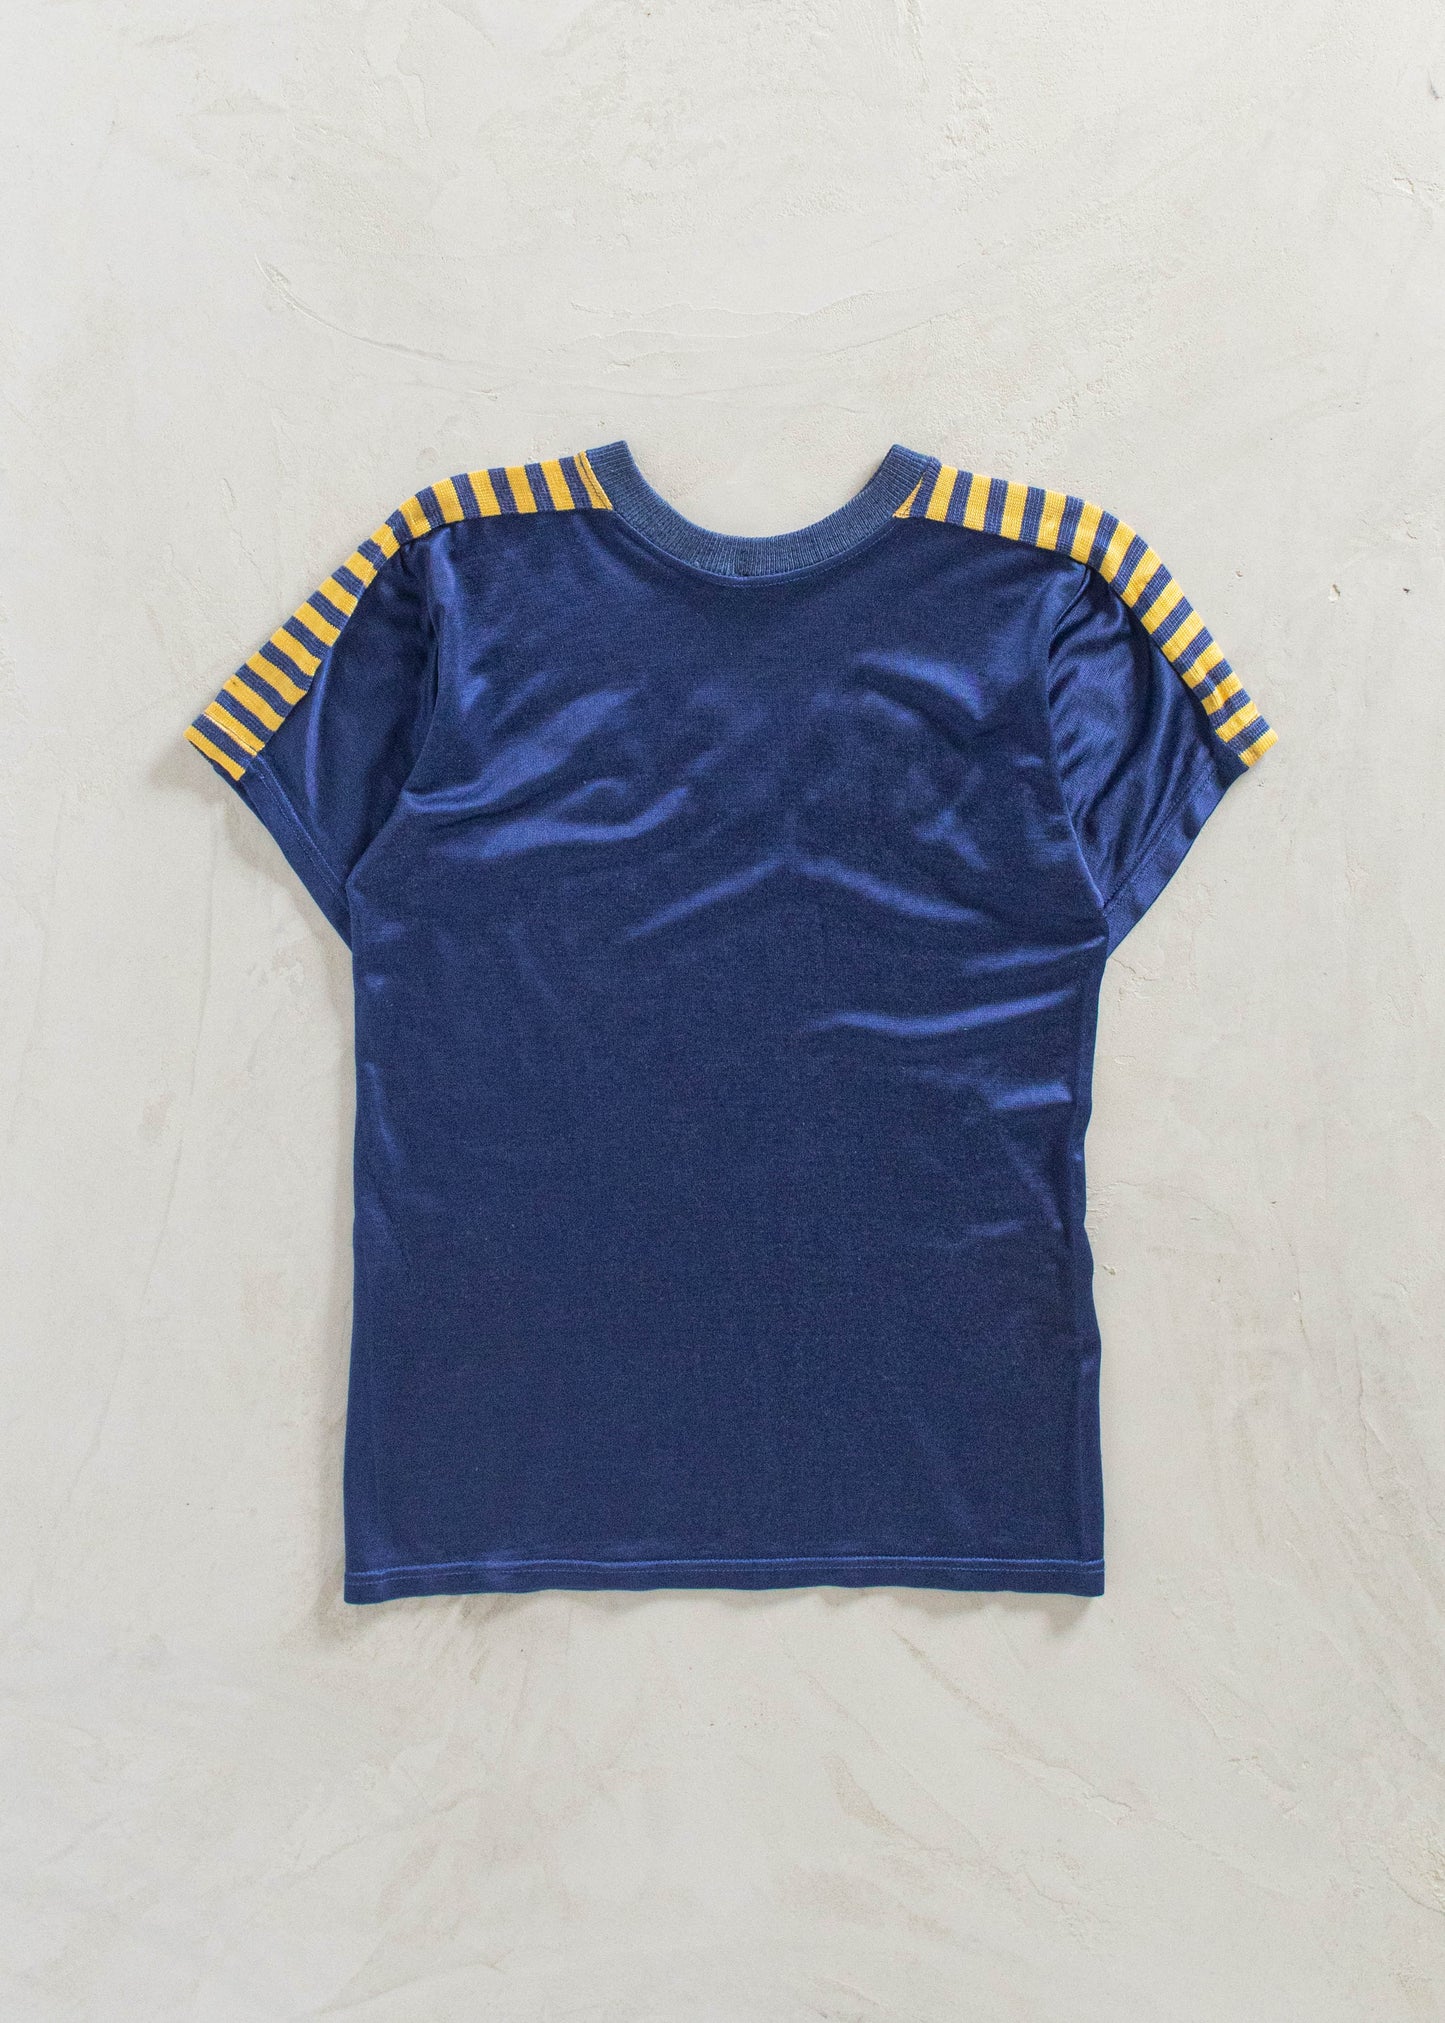 1960s H.E.L Chainstitched Sport Jersey Size XS/S